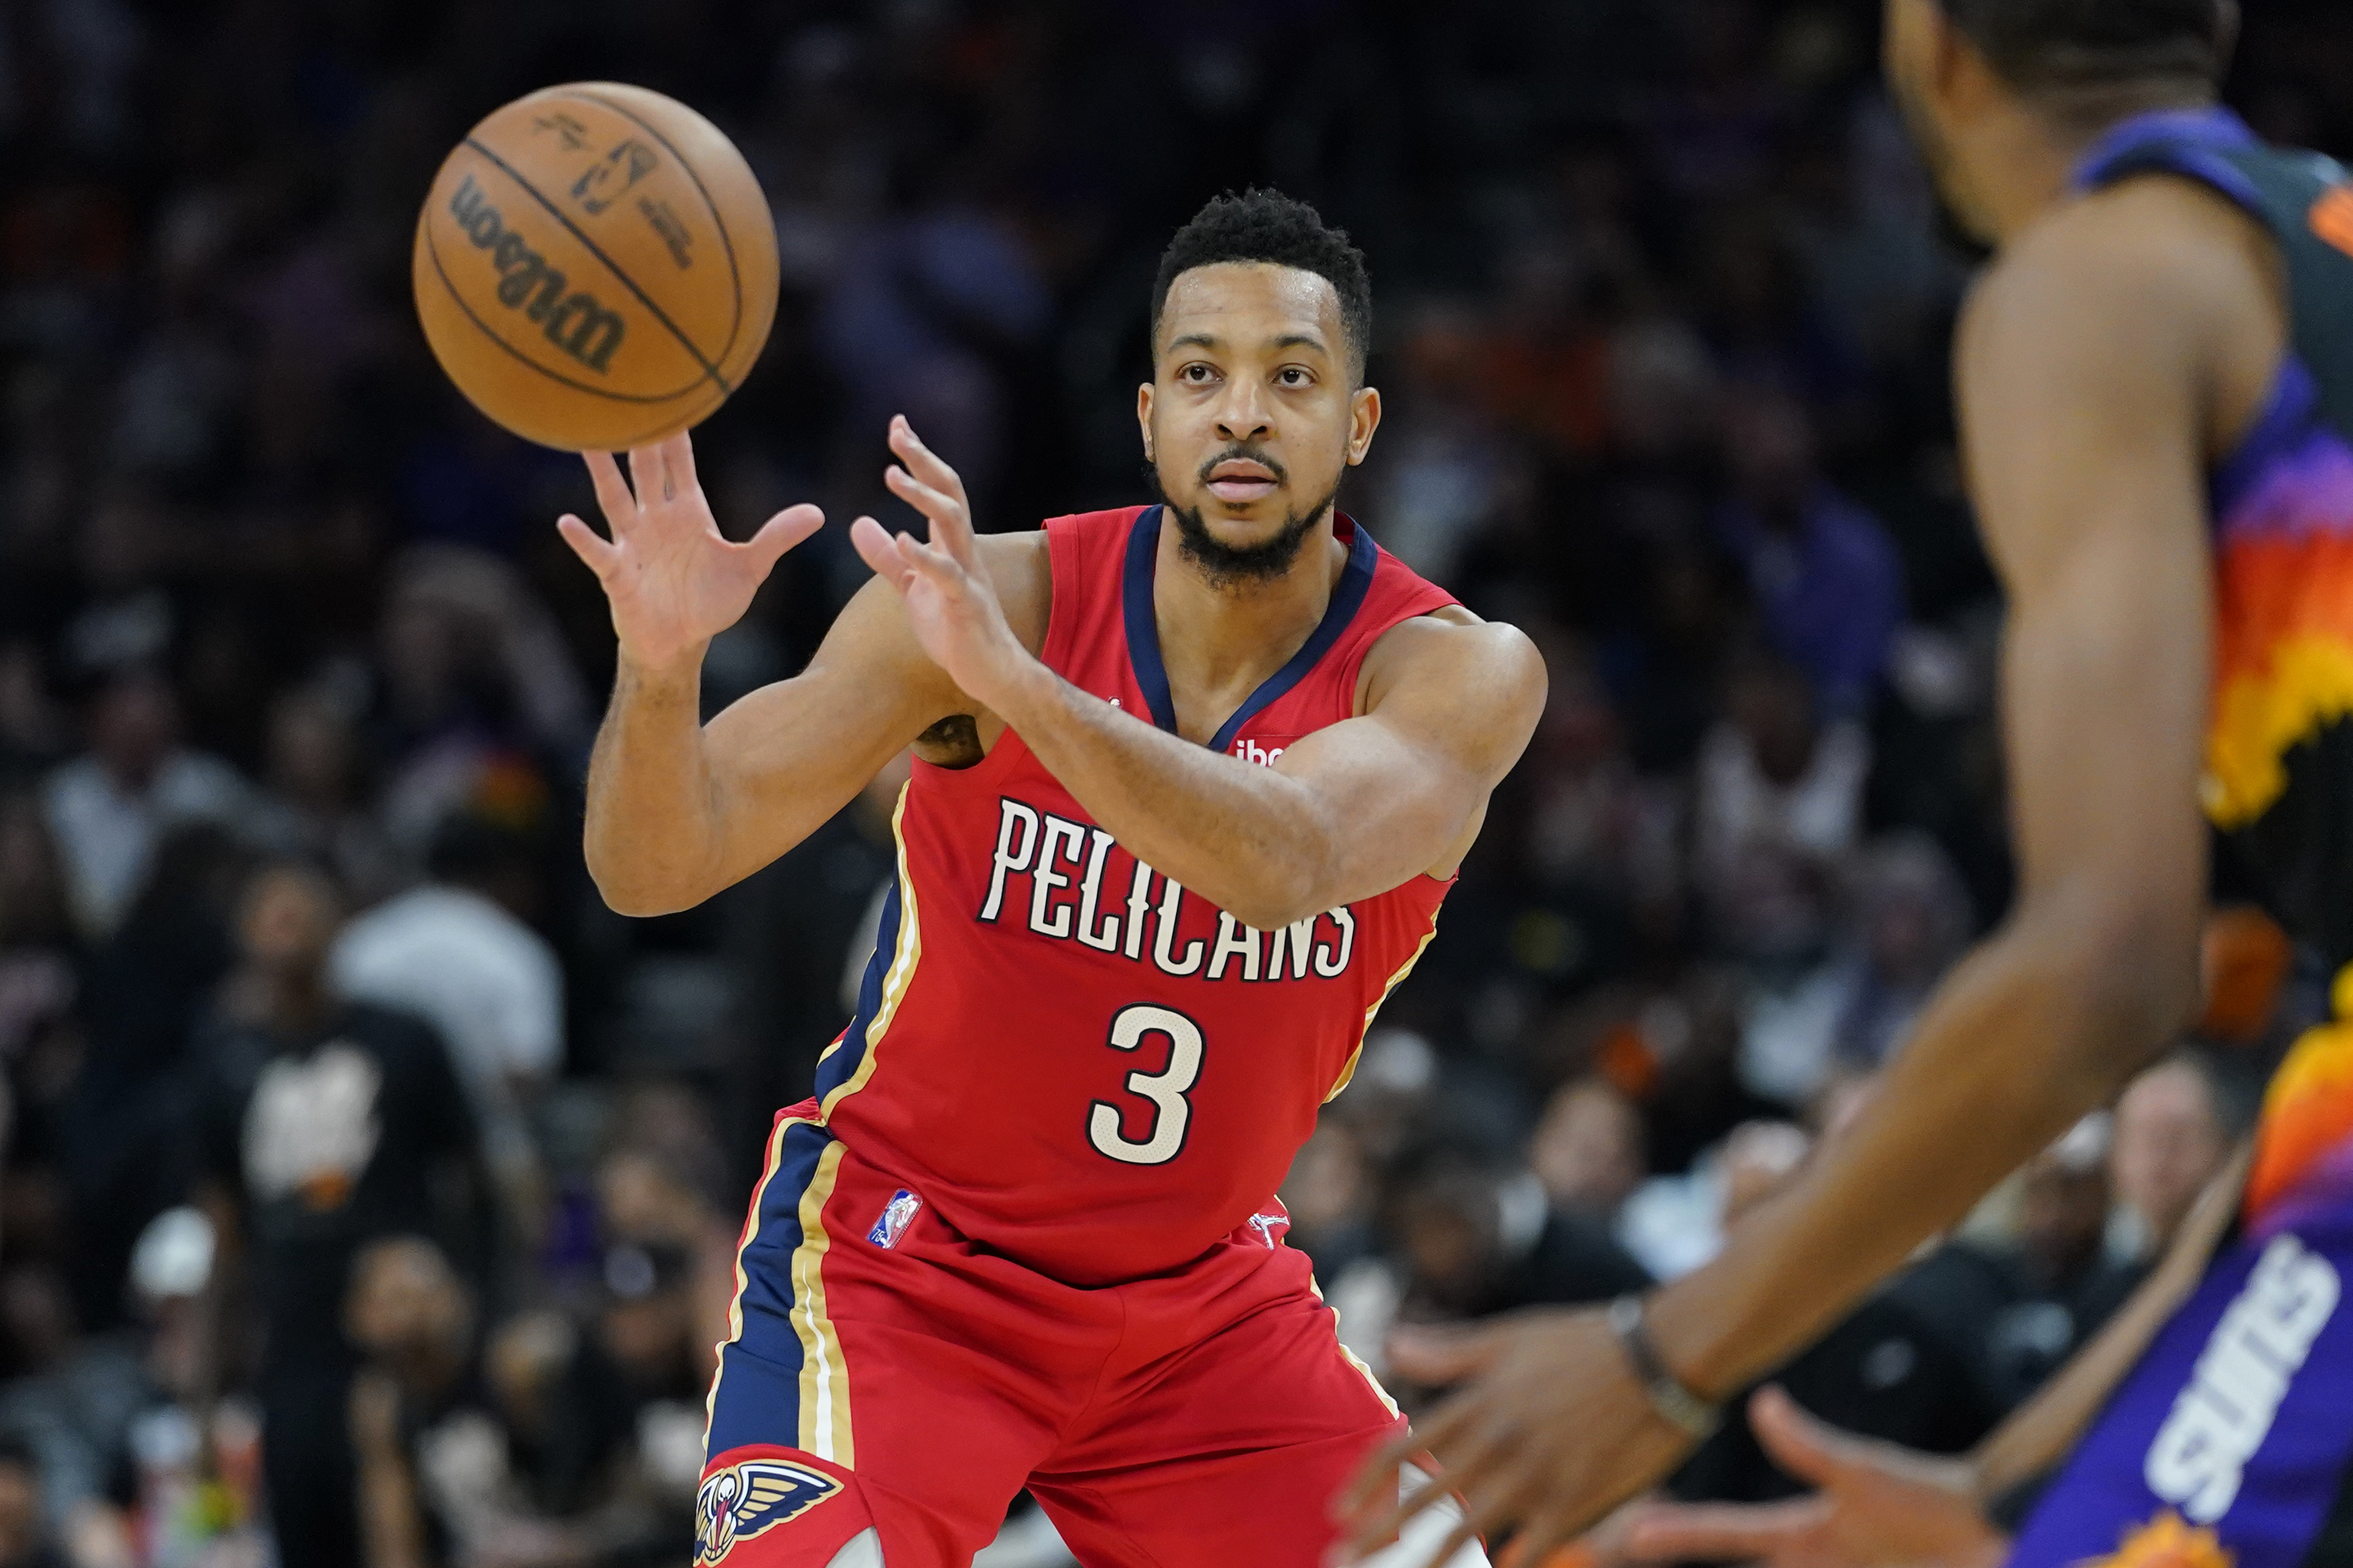 Pelicans Playoff Push is Only Half the Story of CJ McCollum Trade